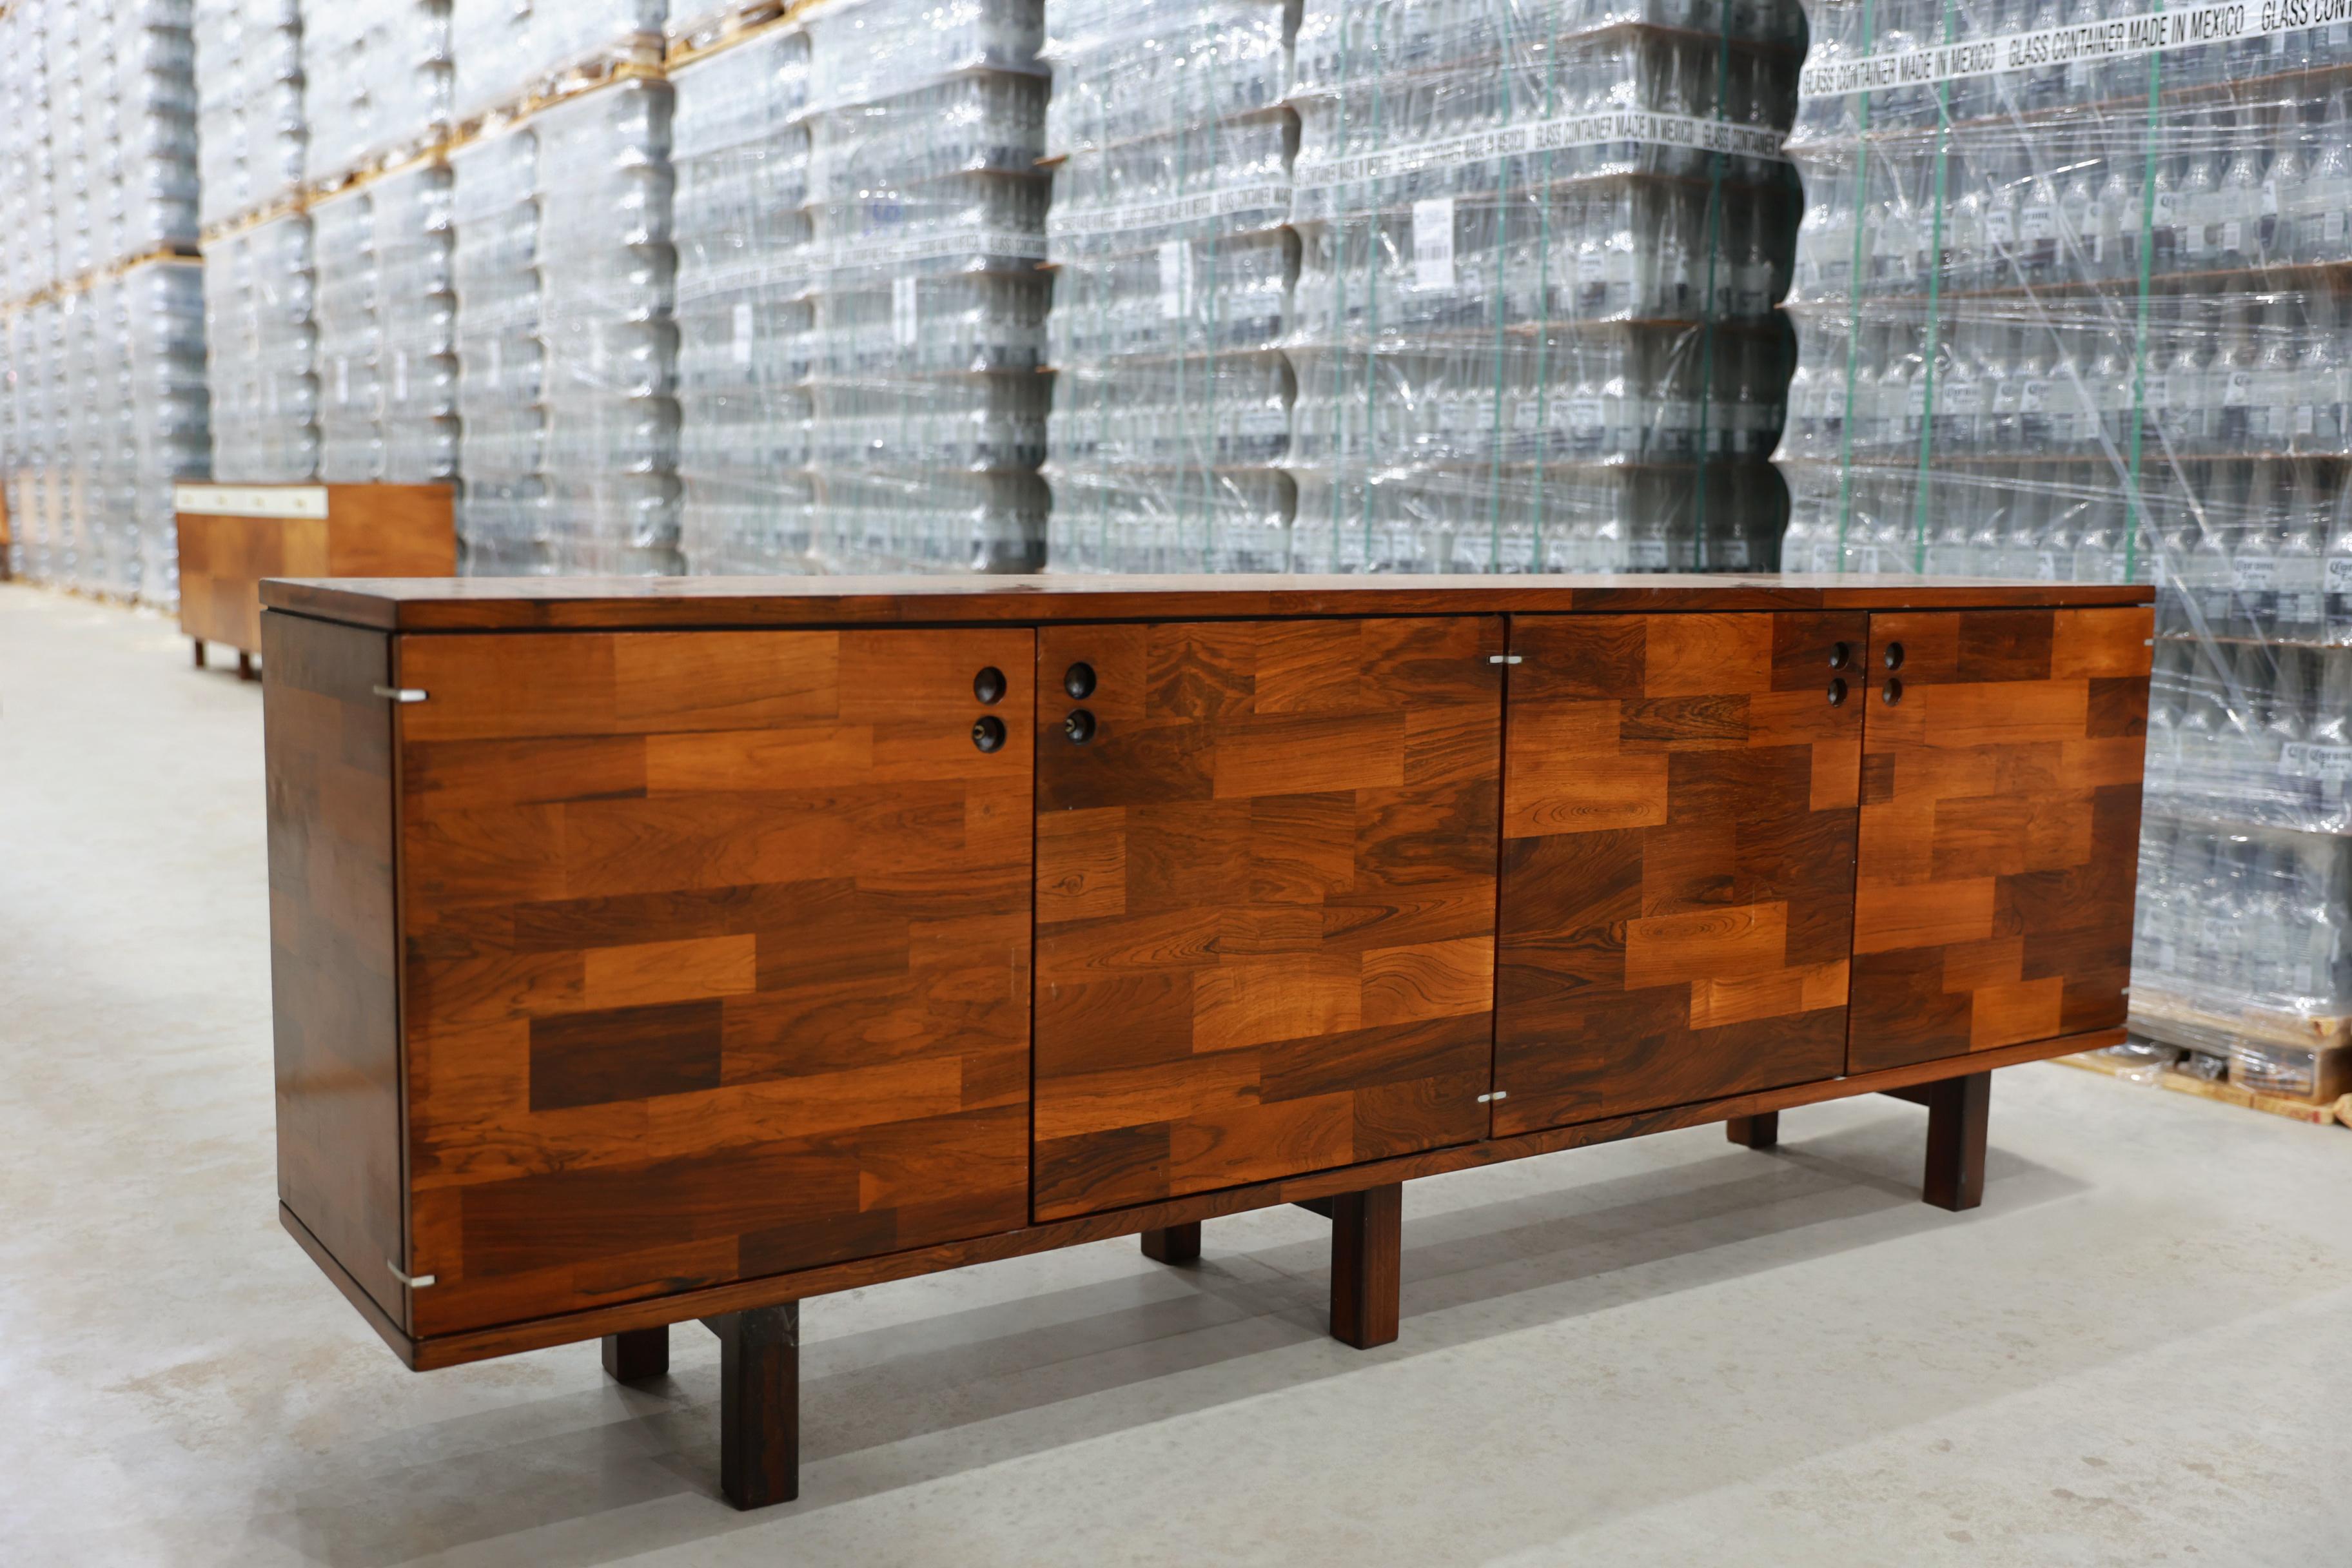 South American Credenza in Hardwood Patchwork style by Jorge Zalszupin, 1960’s For Sale